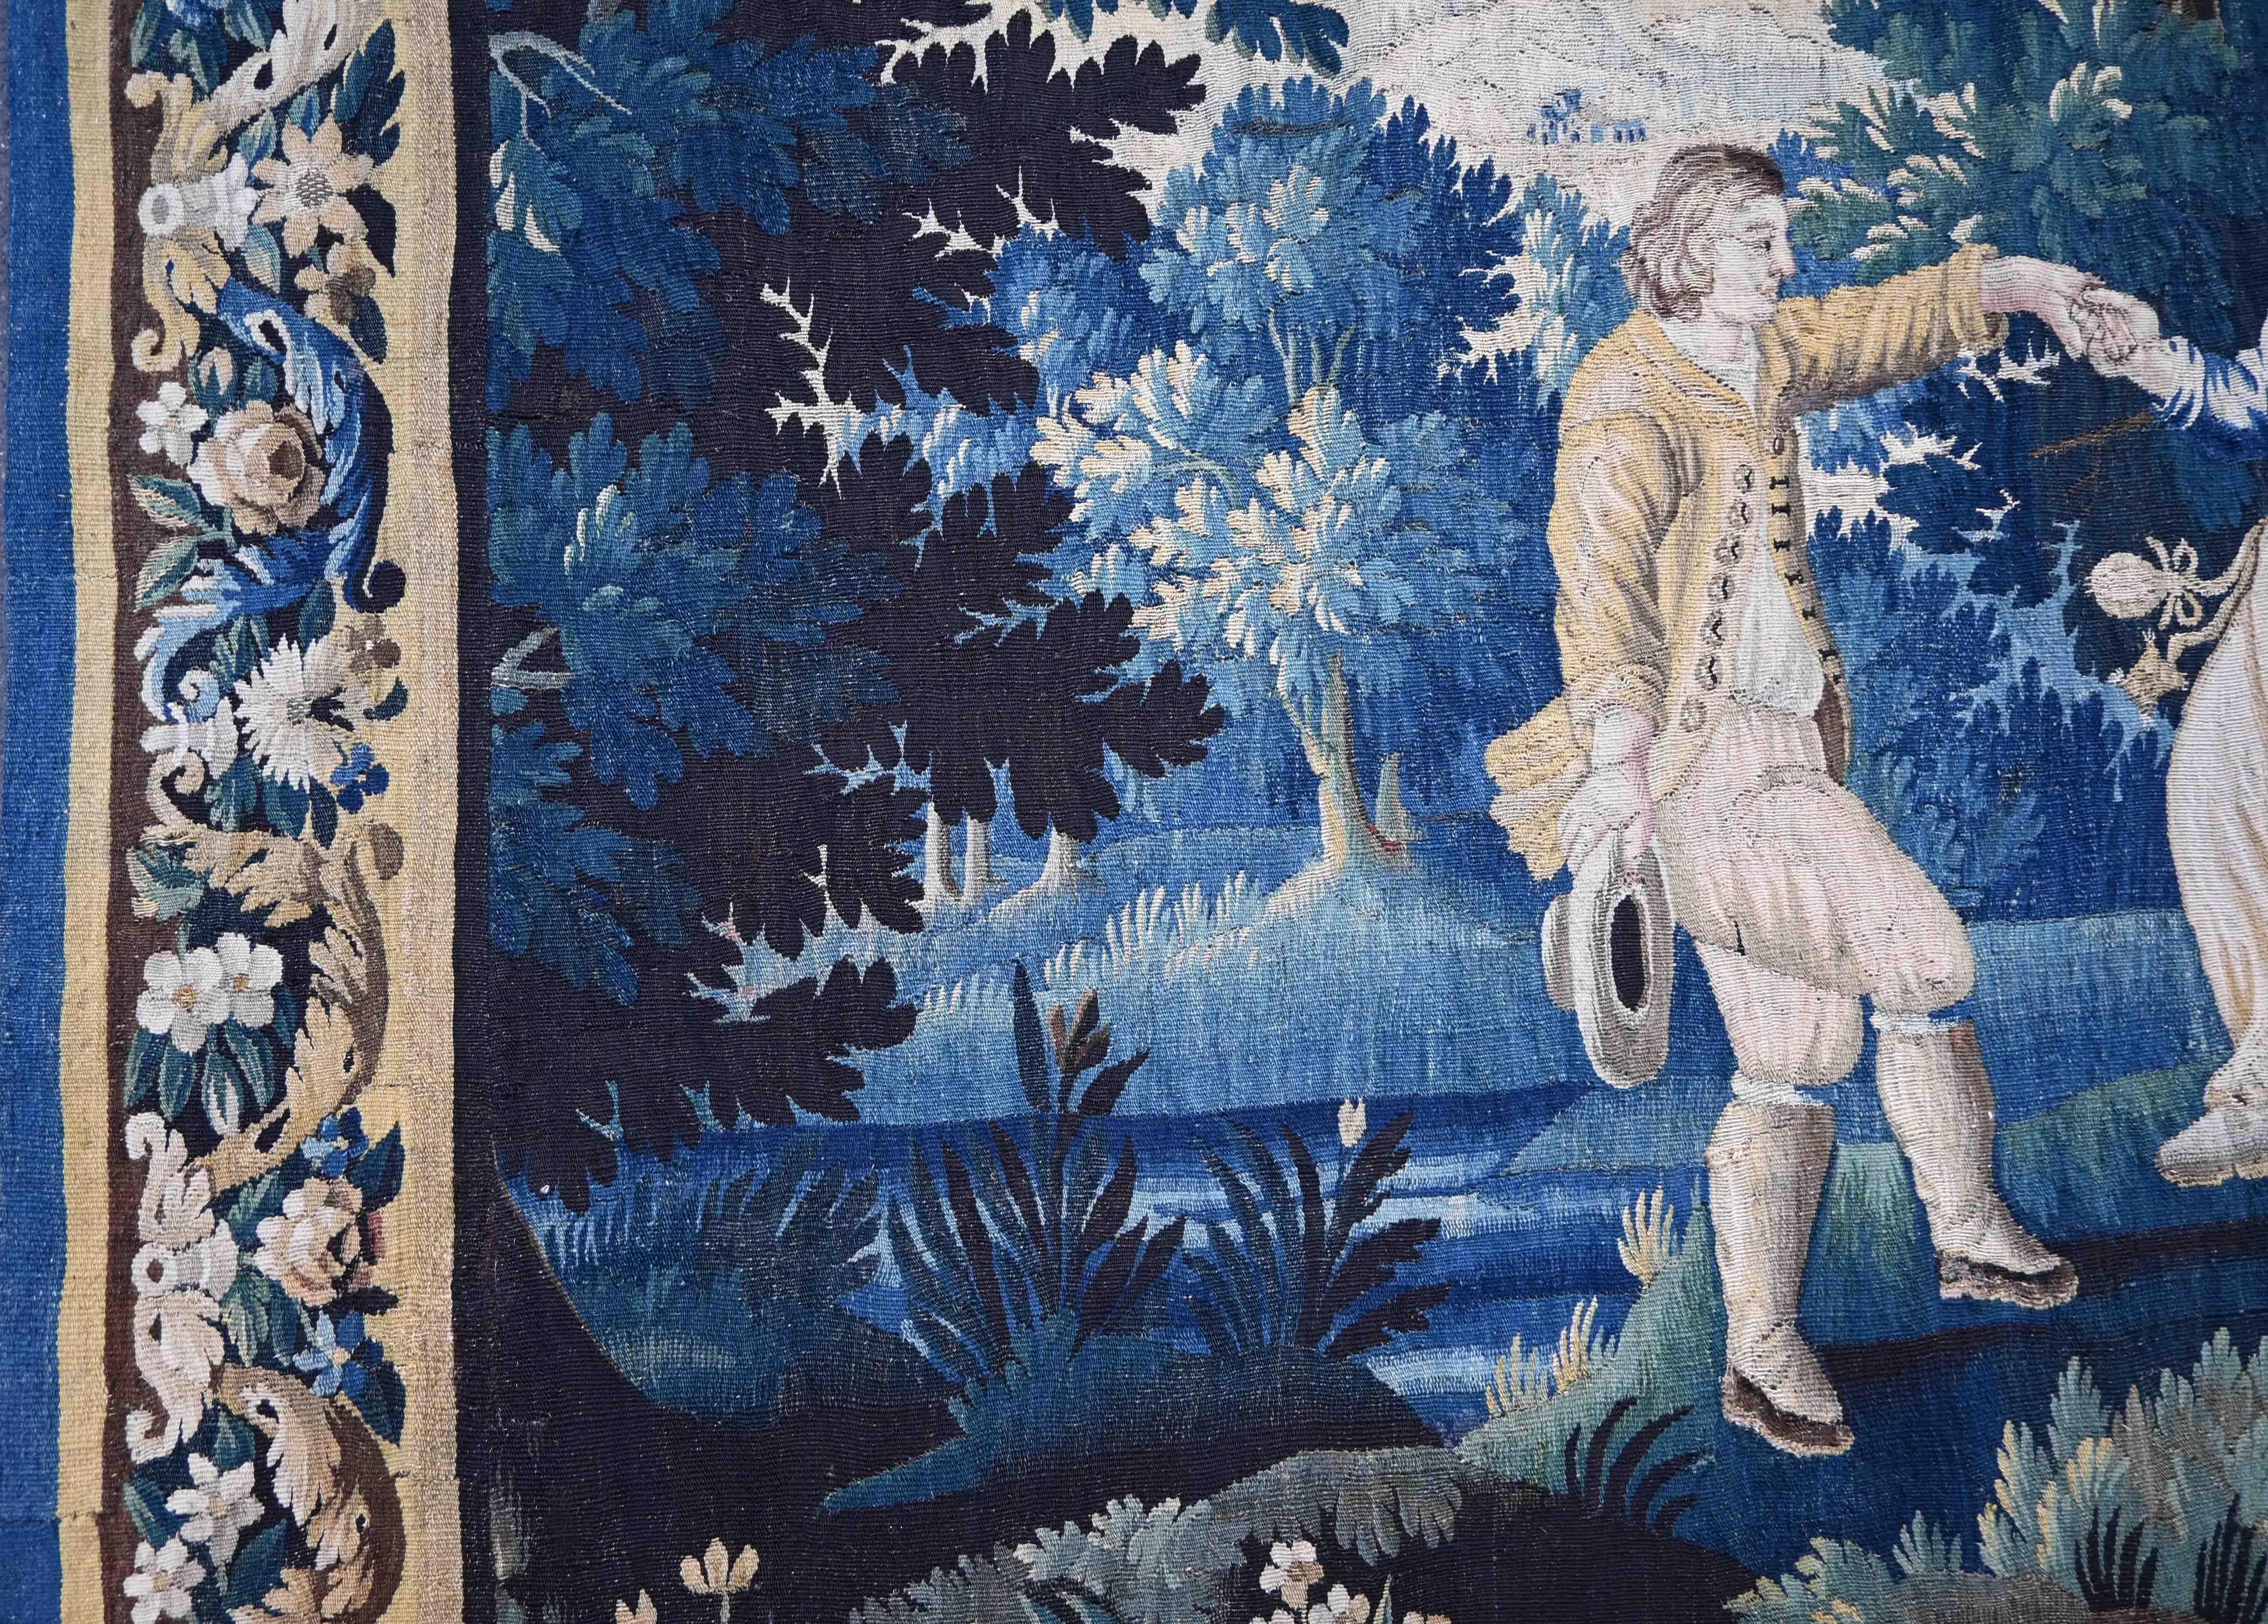 Hand-Woven Tapestry 18th Century Aubusson 'Child's Play' - N° 1317 For Sale